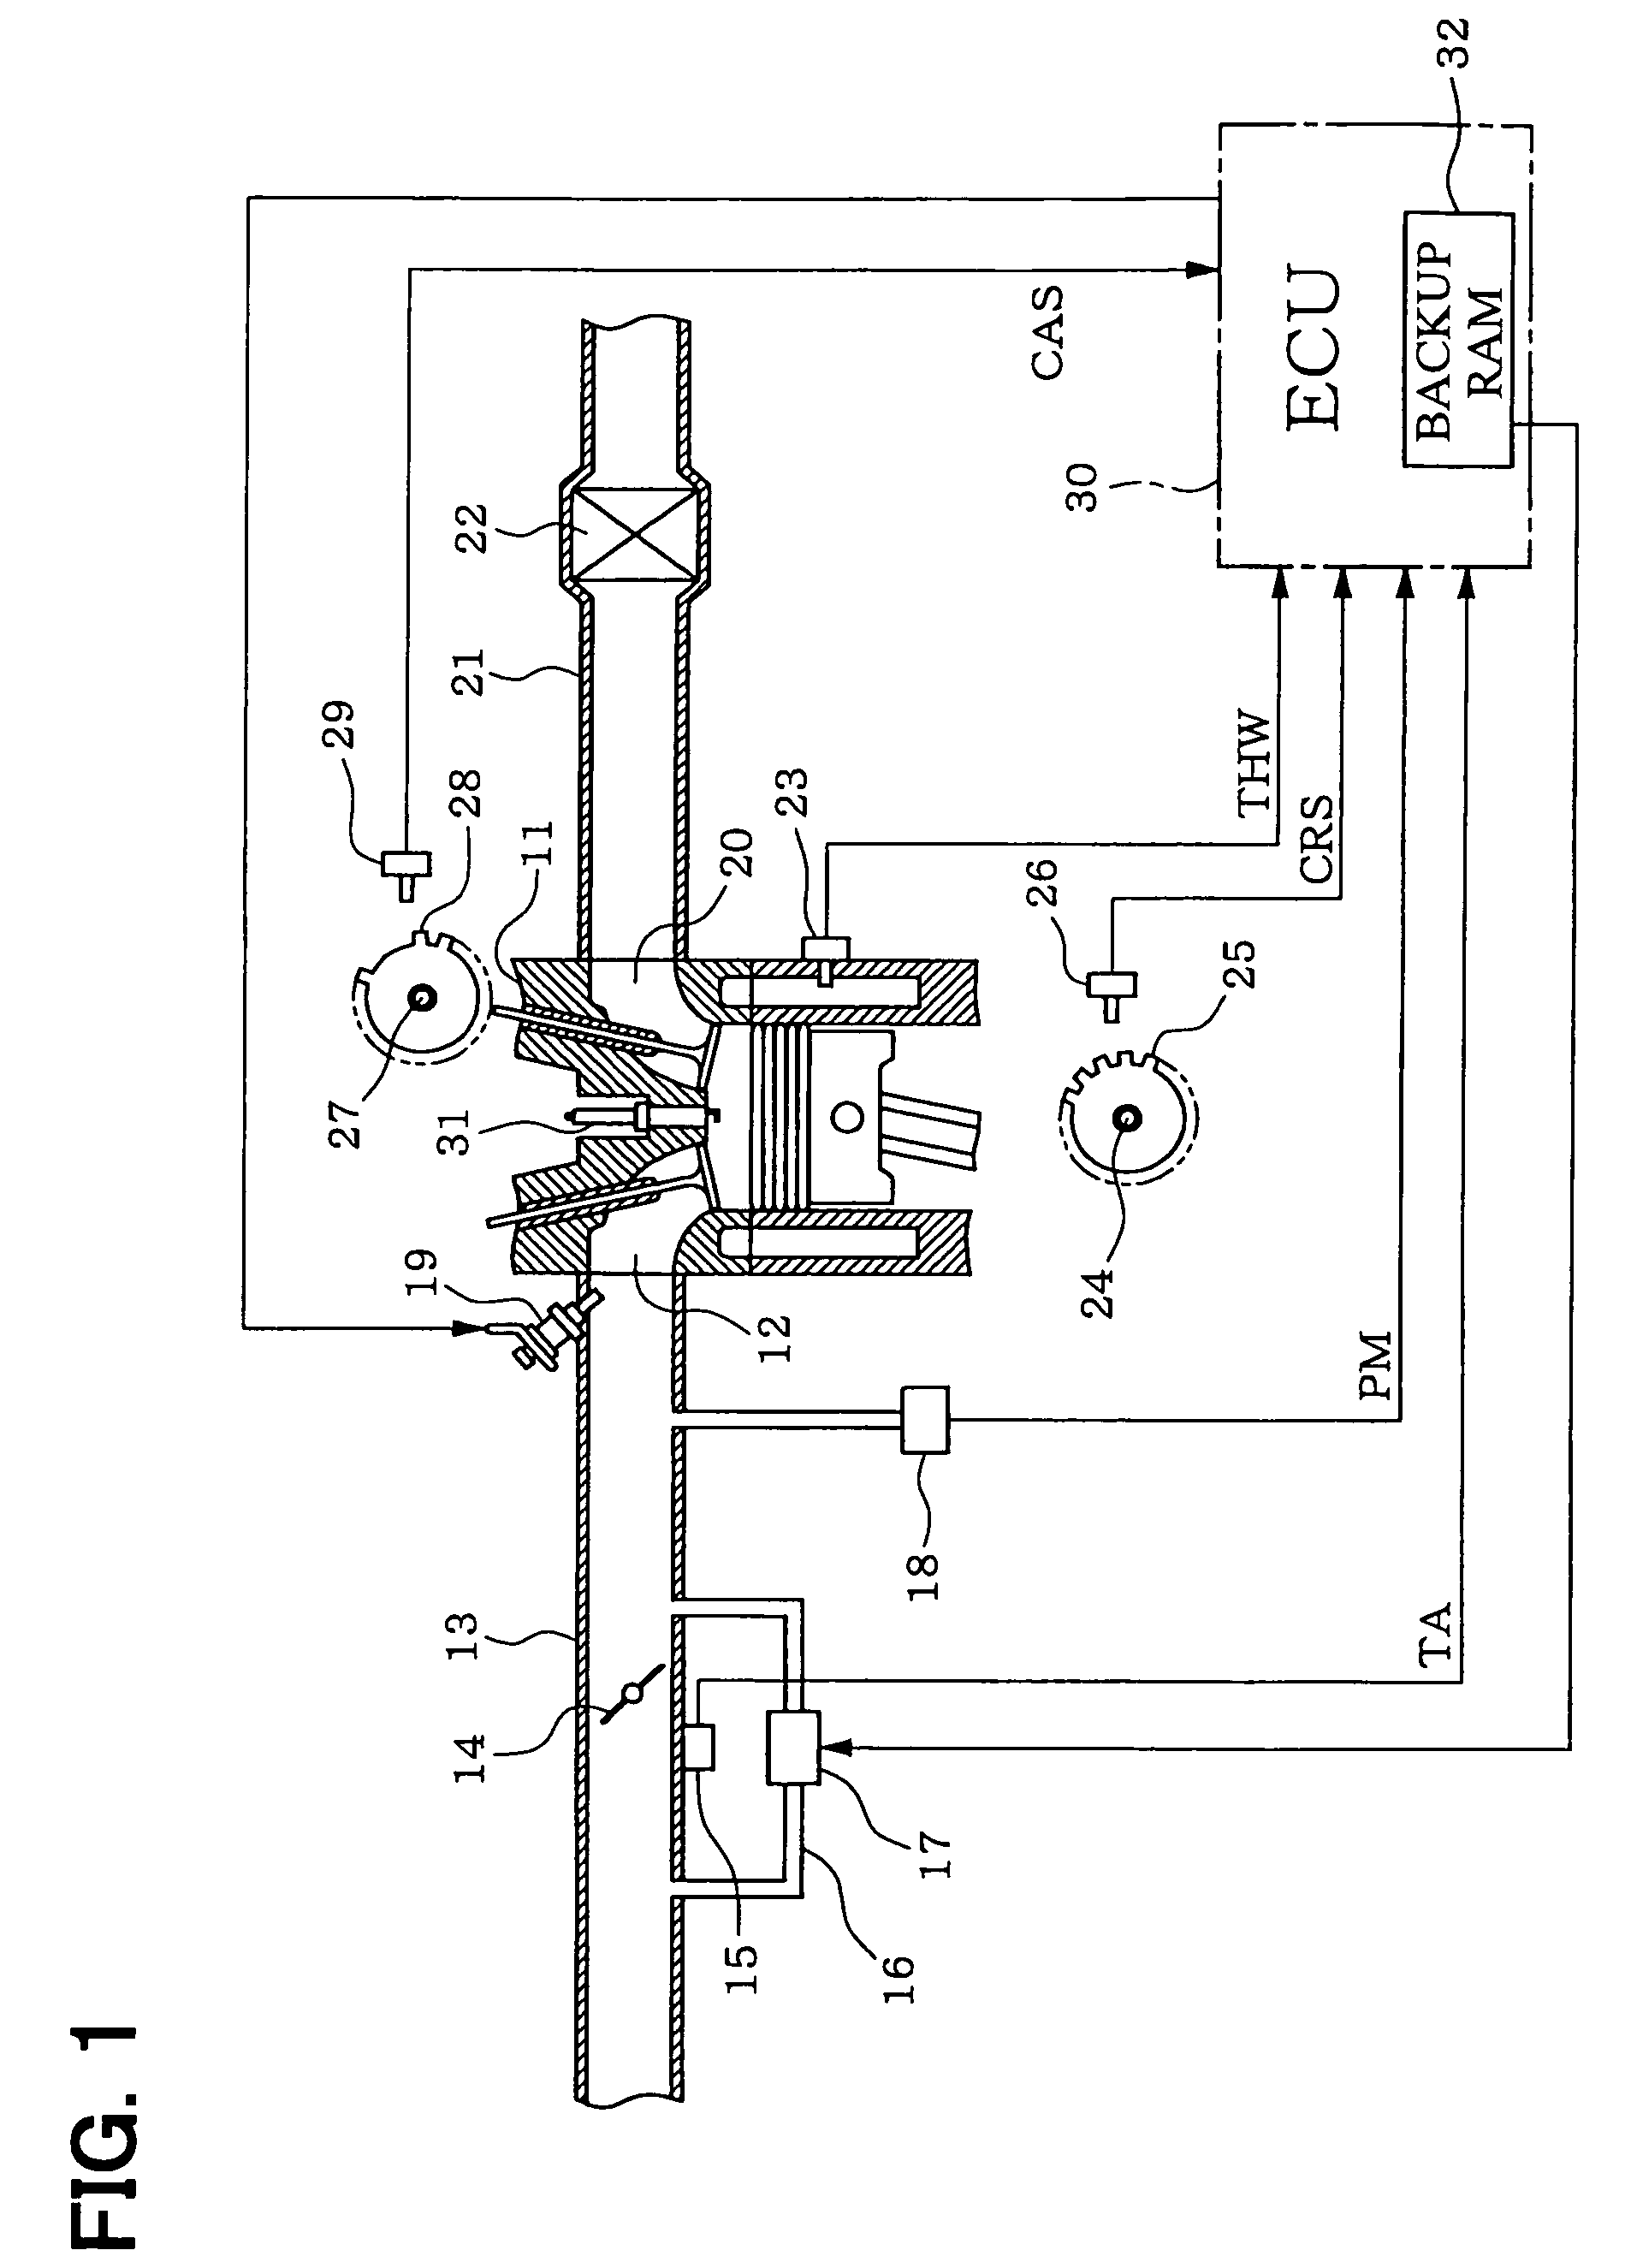 Engine starting and stopping control device